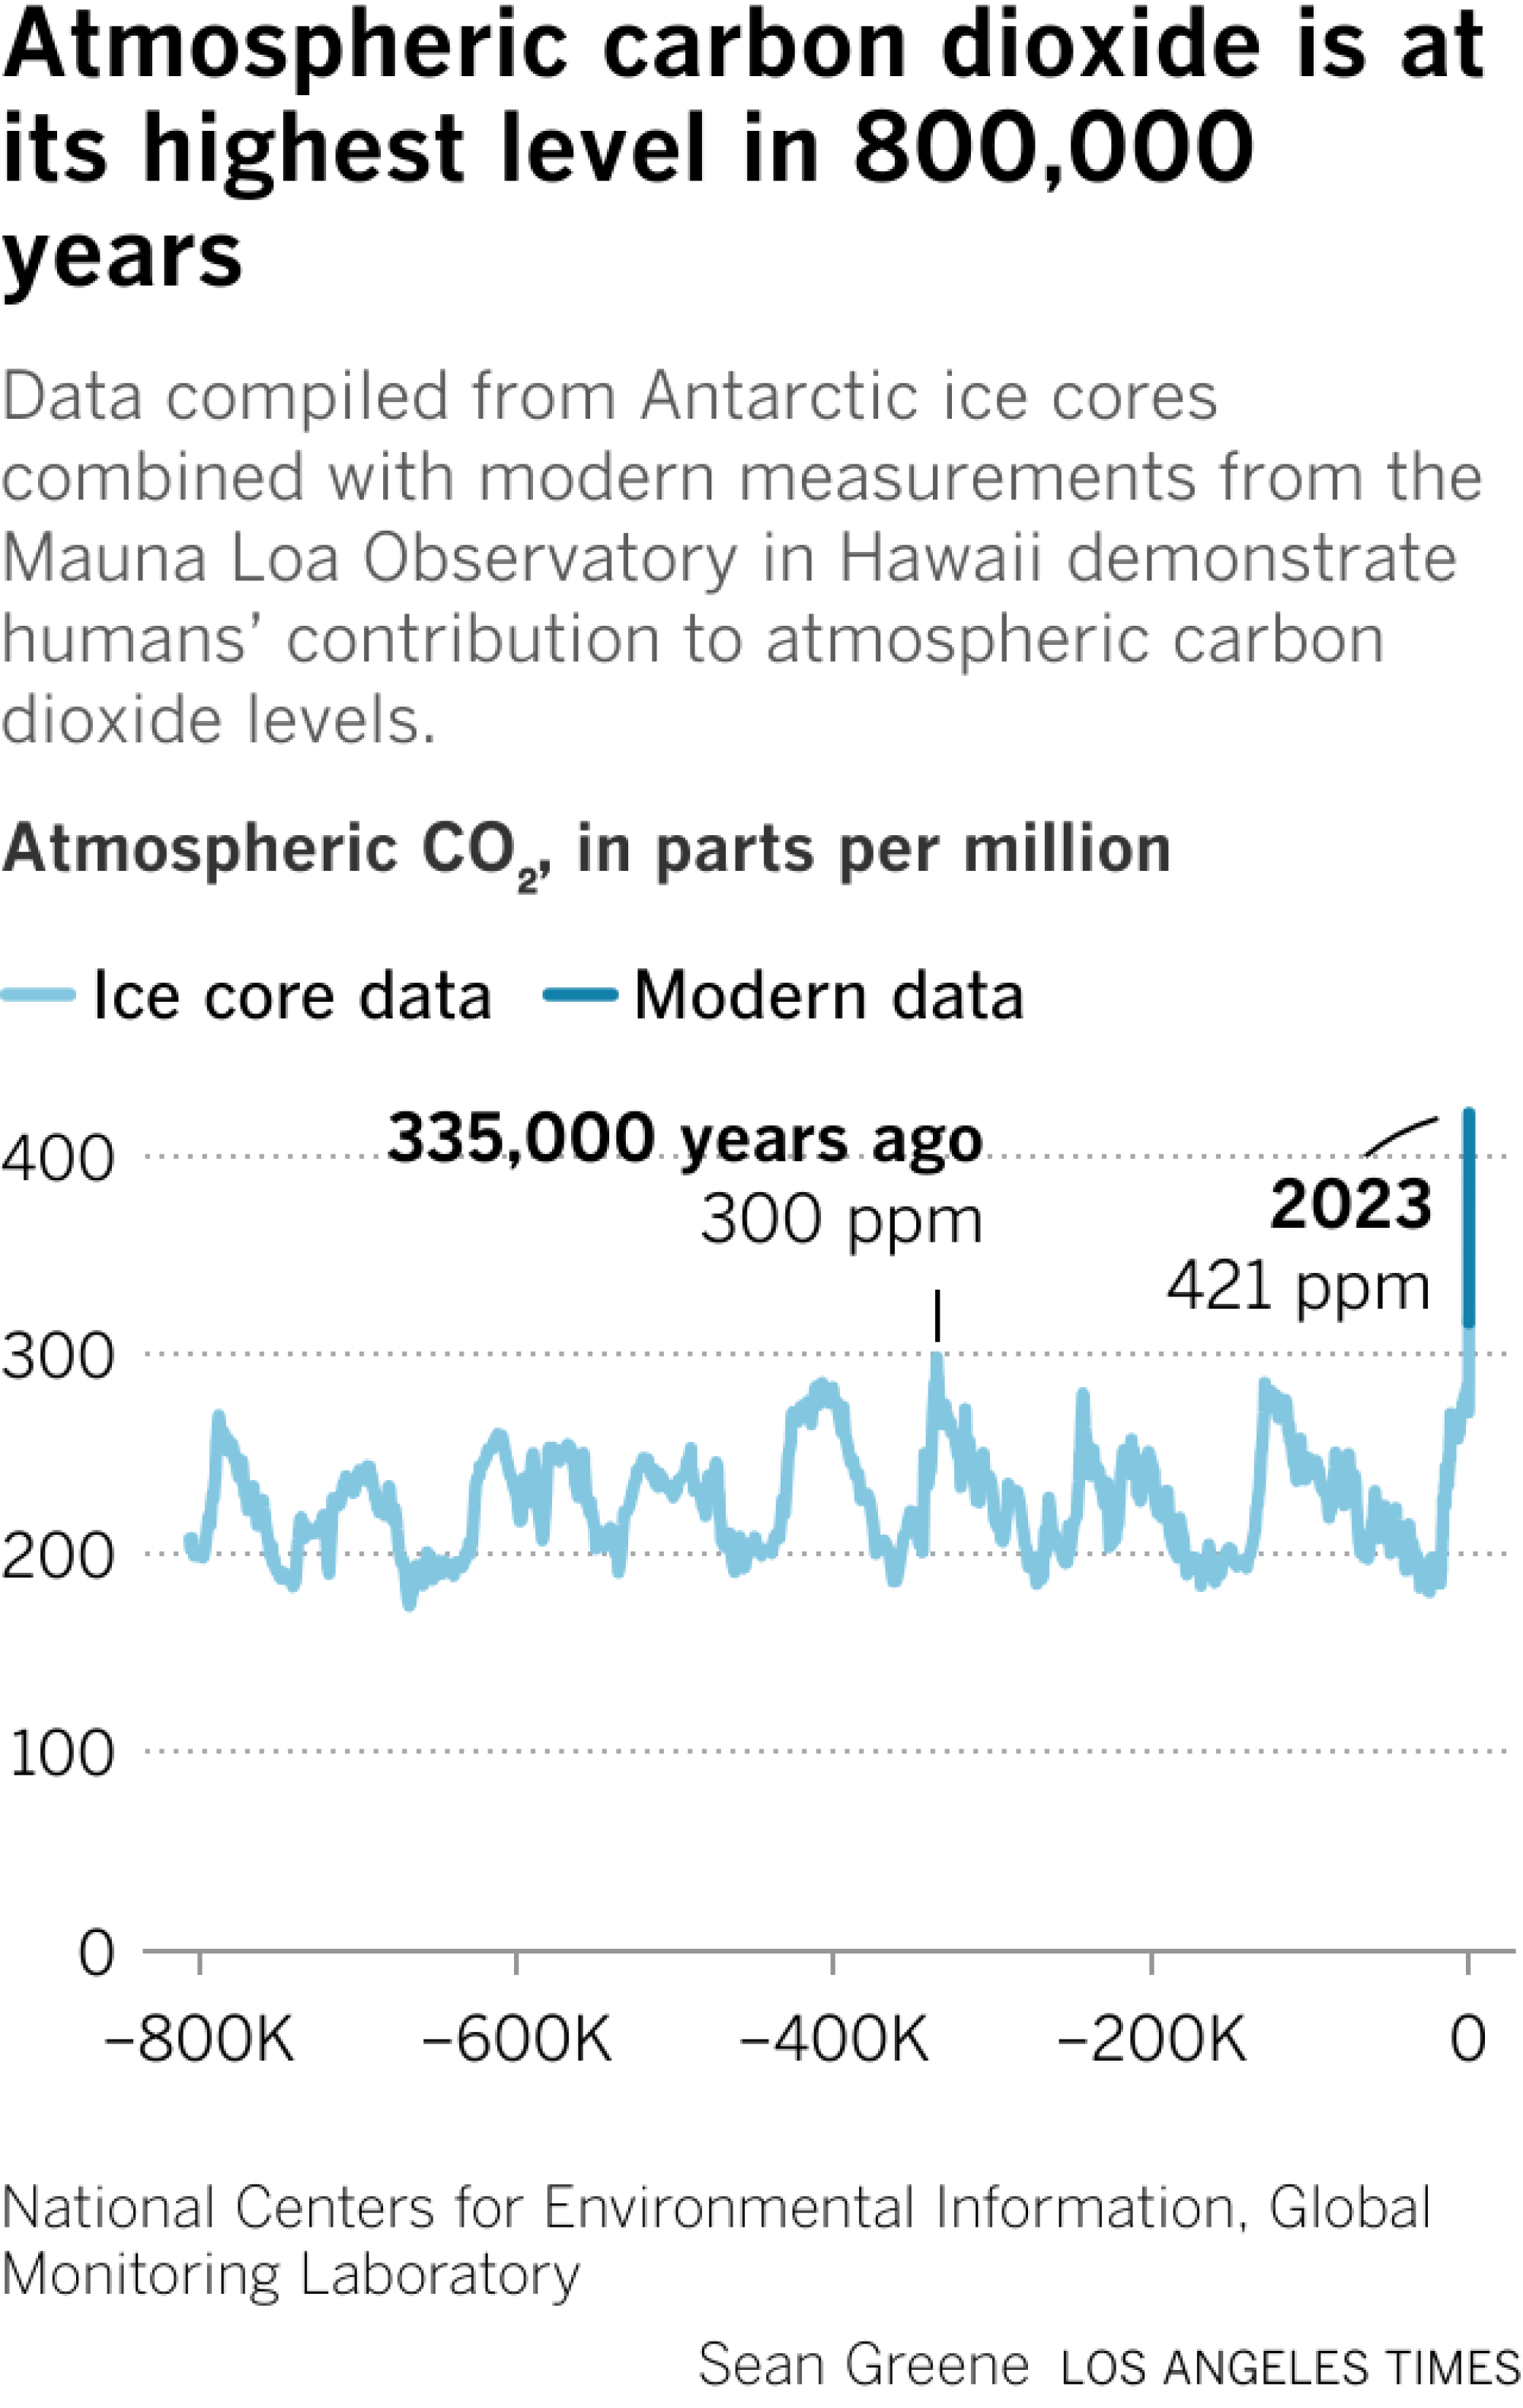 A line chart shows atmospheric carbon dioxide levels over the past 800,000 years. CO2 last peaked 335,000 years ago at 300 parts per million. In the last several decades, the concentration soared to 421 parts per million.